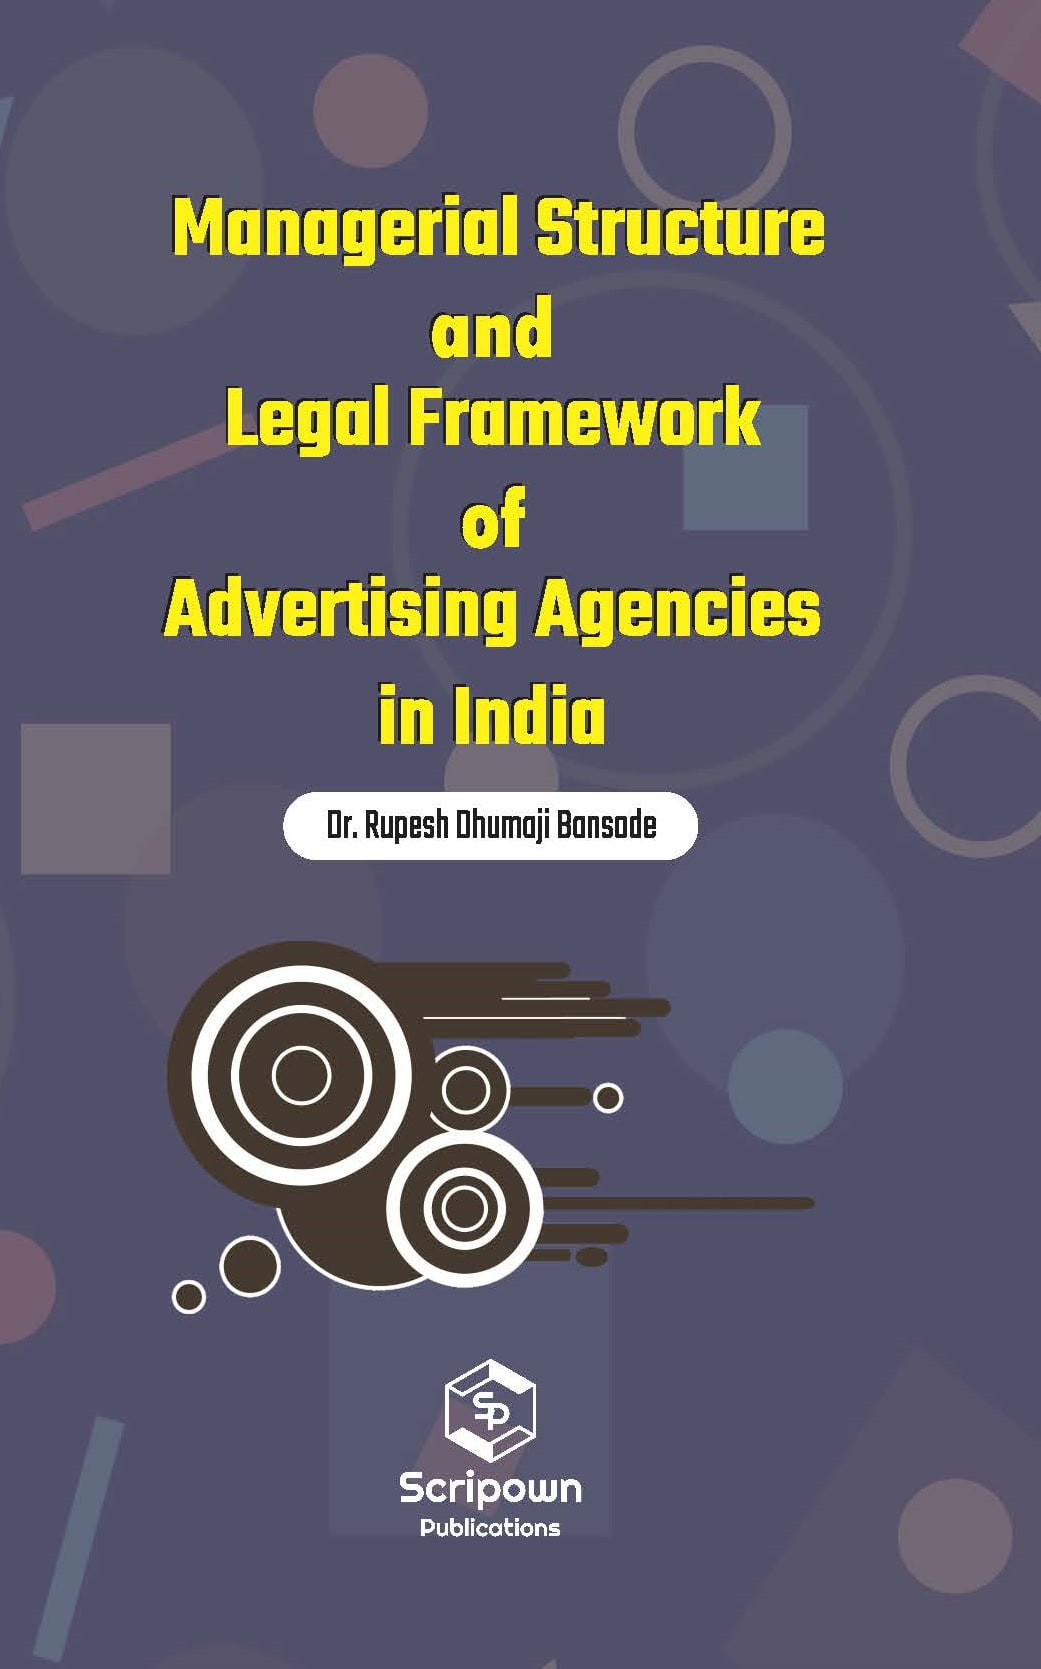 Managerial Structure and Legal Framework of Advertising Agencies in India